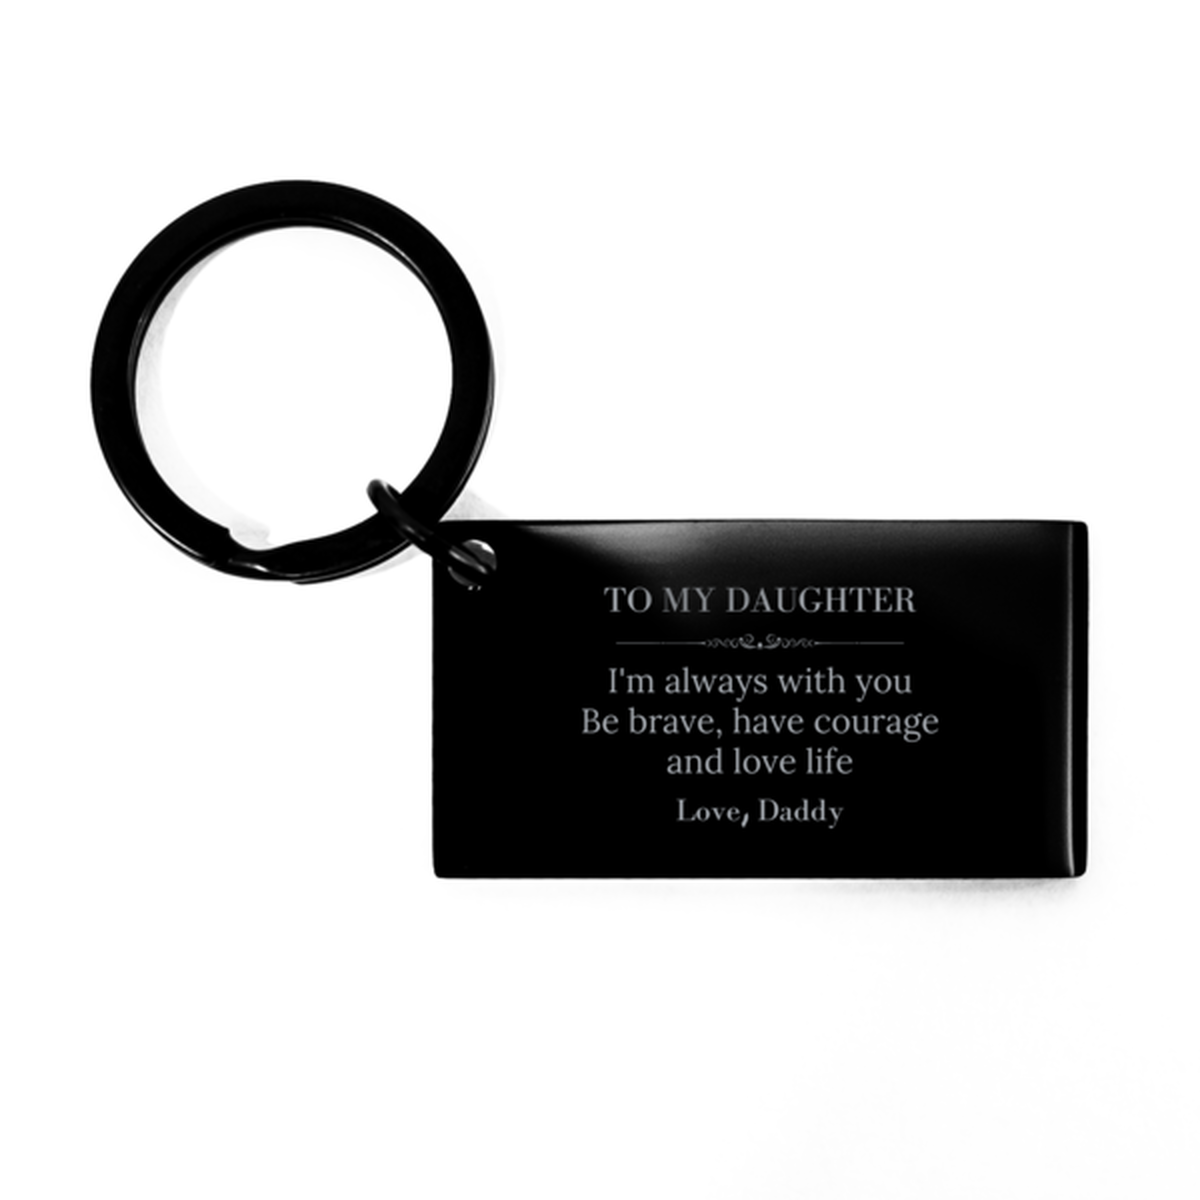 To My Daughter Gifts from Daddy, Unique Keychain Inspirational Christmas Birthday Graduation Gifts for Daughter I'm always with you. Be brave, have courage and love life. Love, Daddy